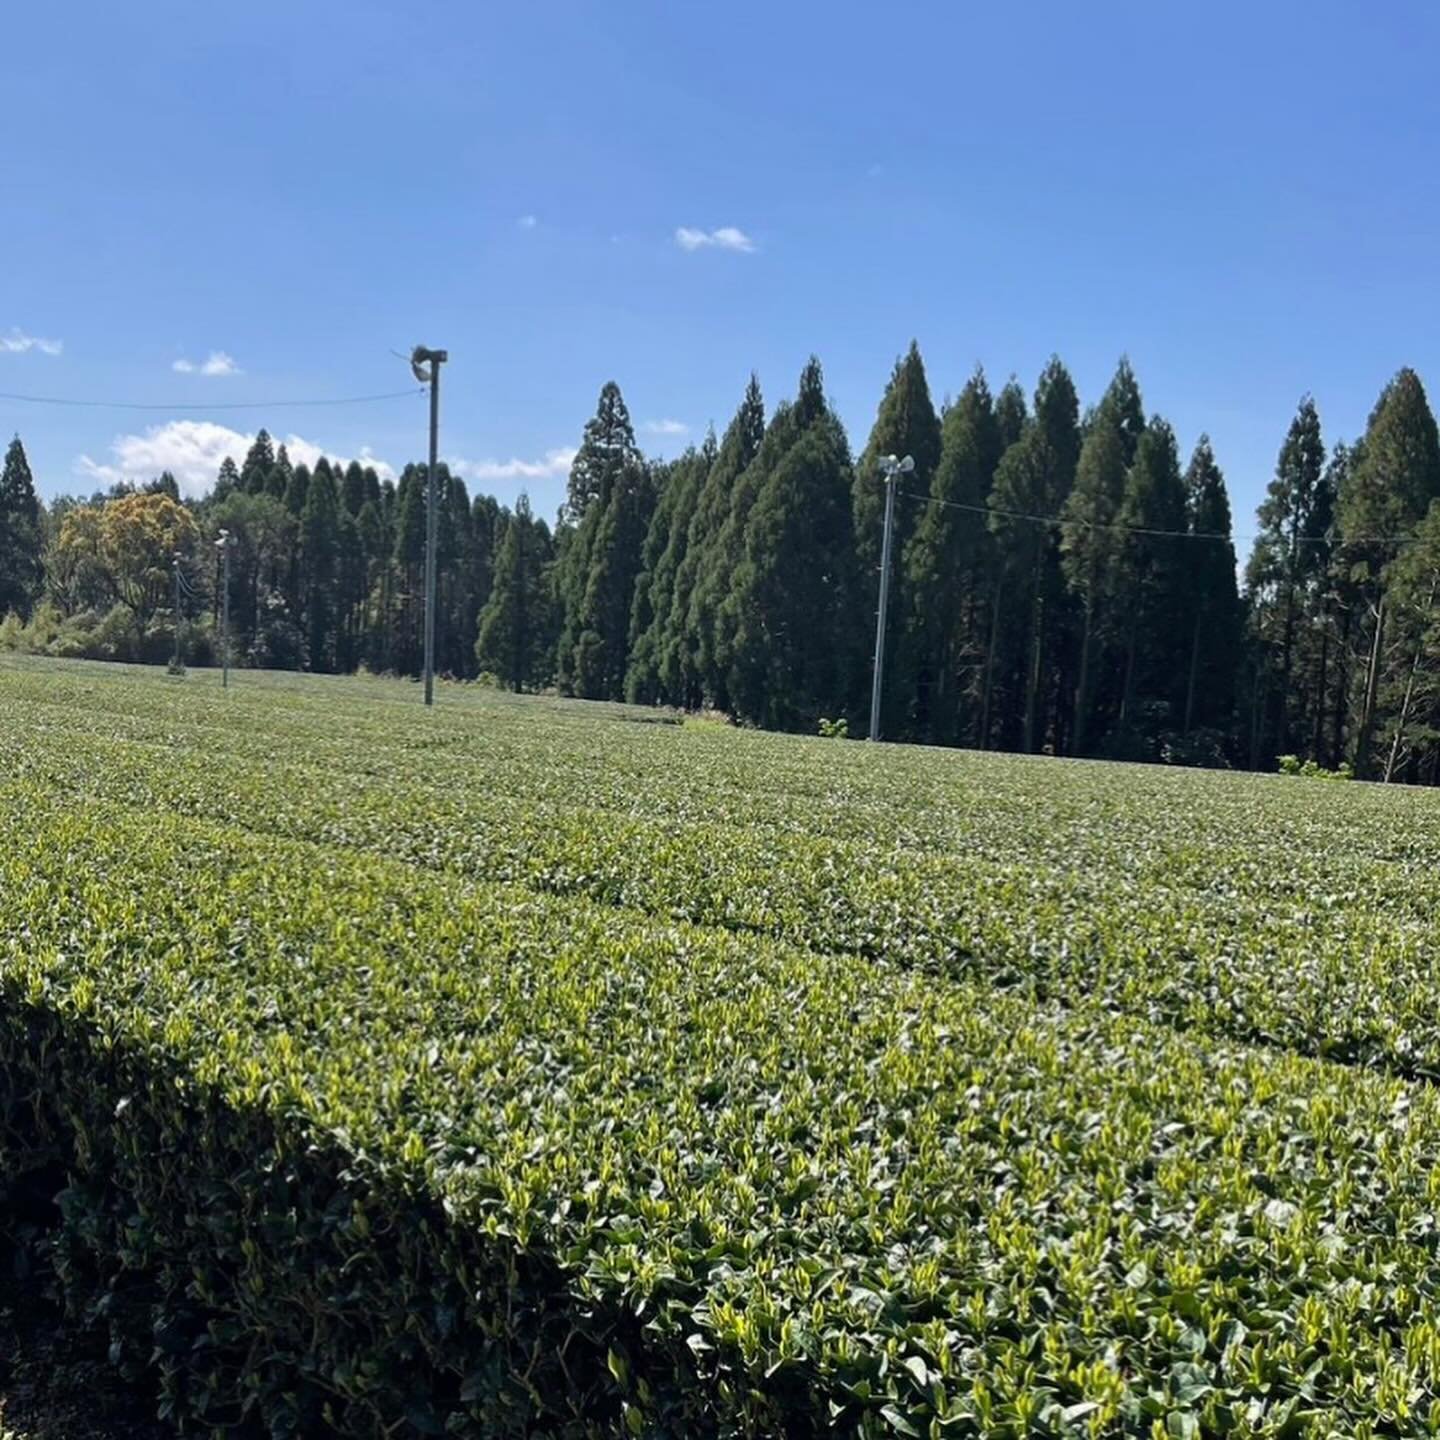 Postcard from Kagoshima🌱🌱
Tea fields are almost ready for harvest - which means we will soon have Shincha teas available. Always so exciting to taste the new teas !

#japanesetea #organicjapanesetea #kagoshima #kirishima #sencha #organicsencha #mat